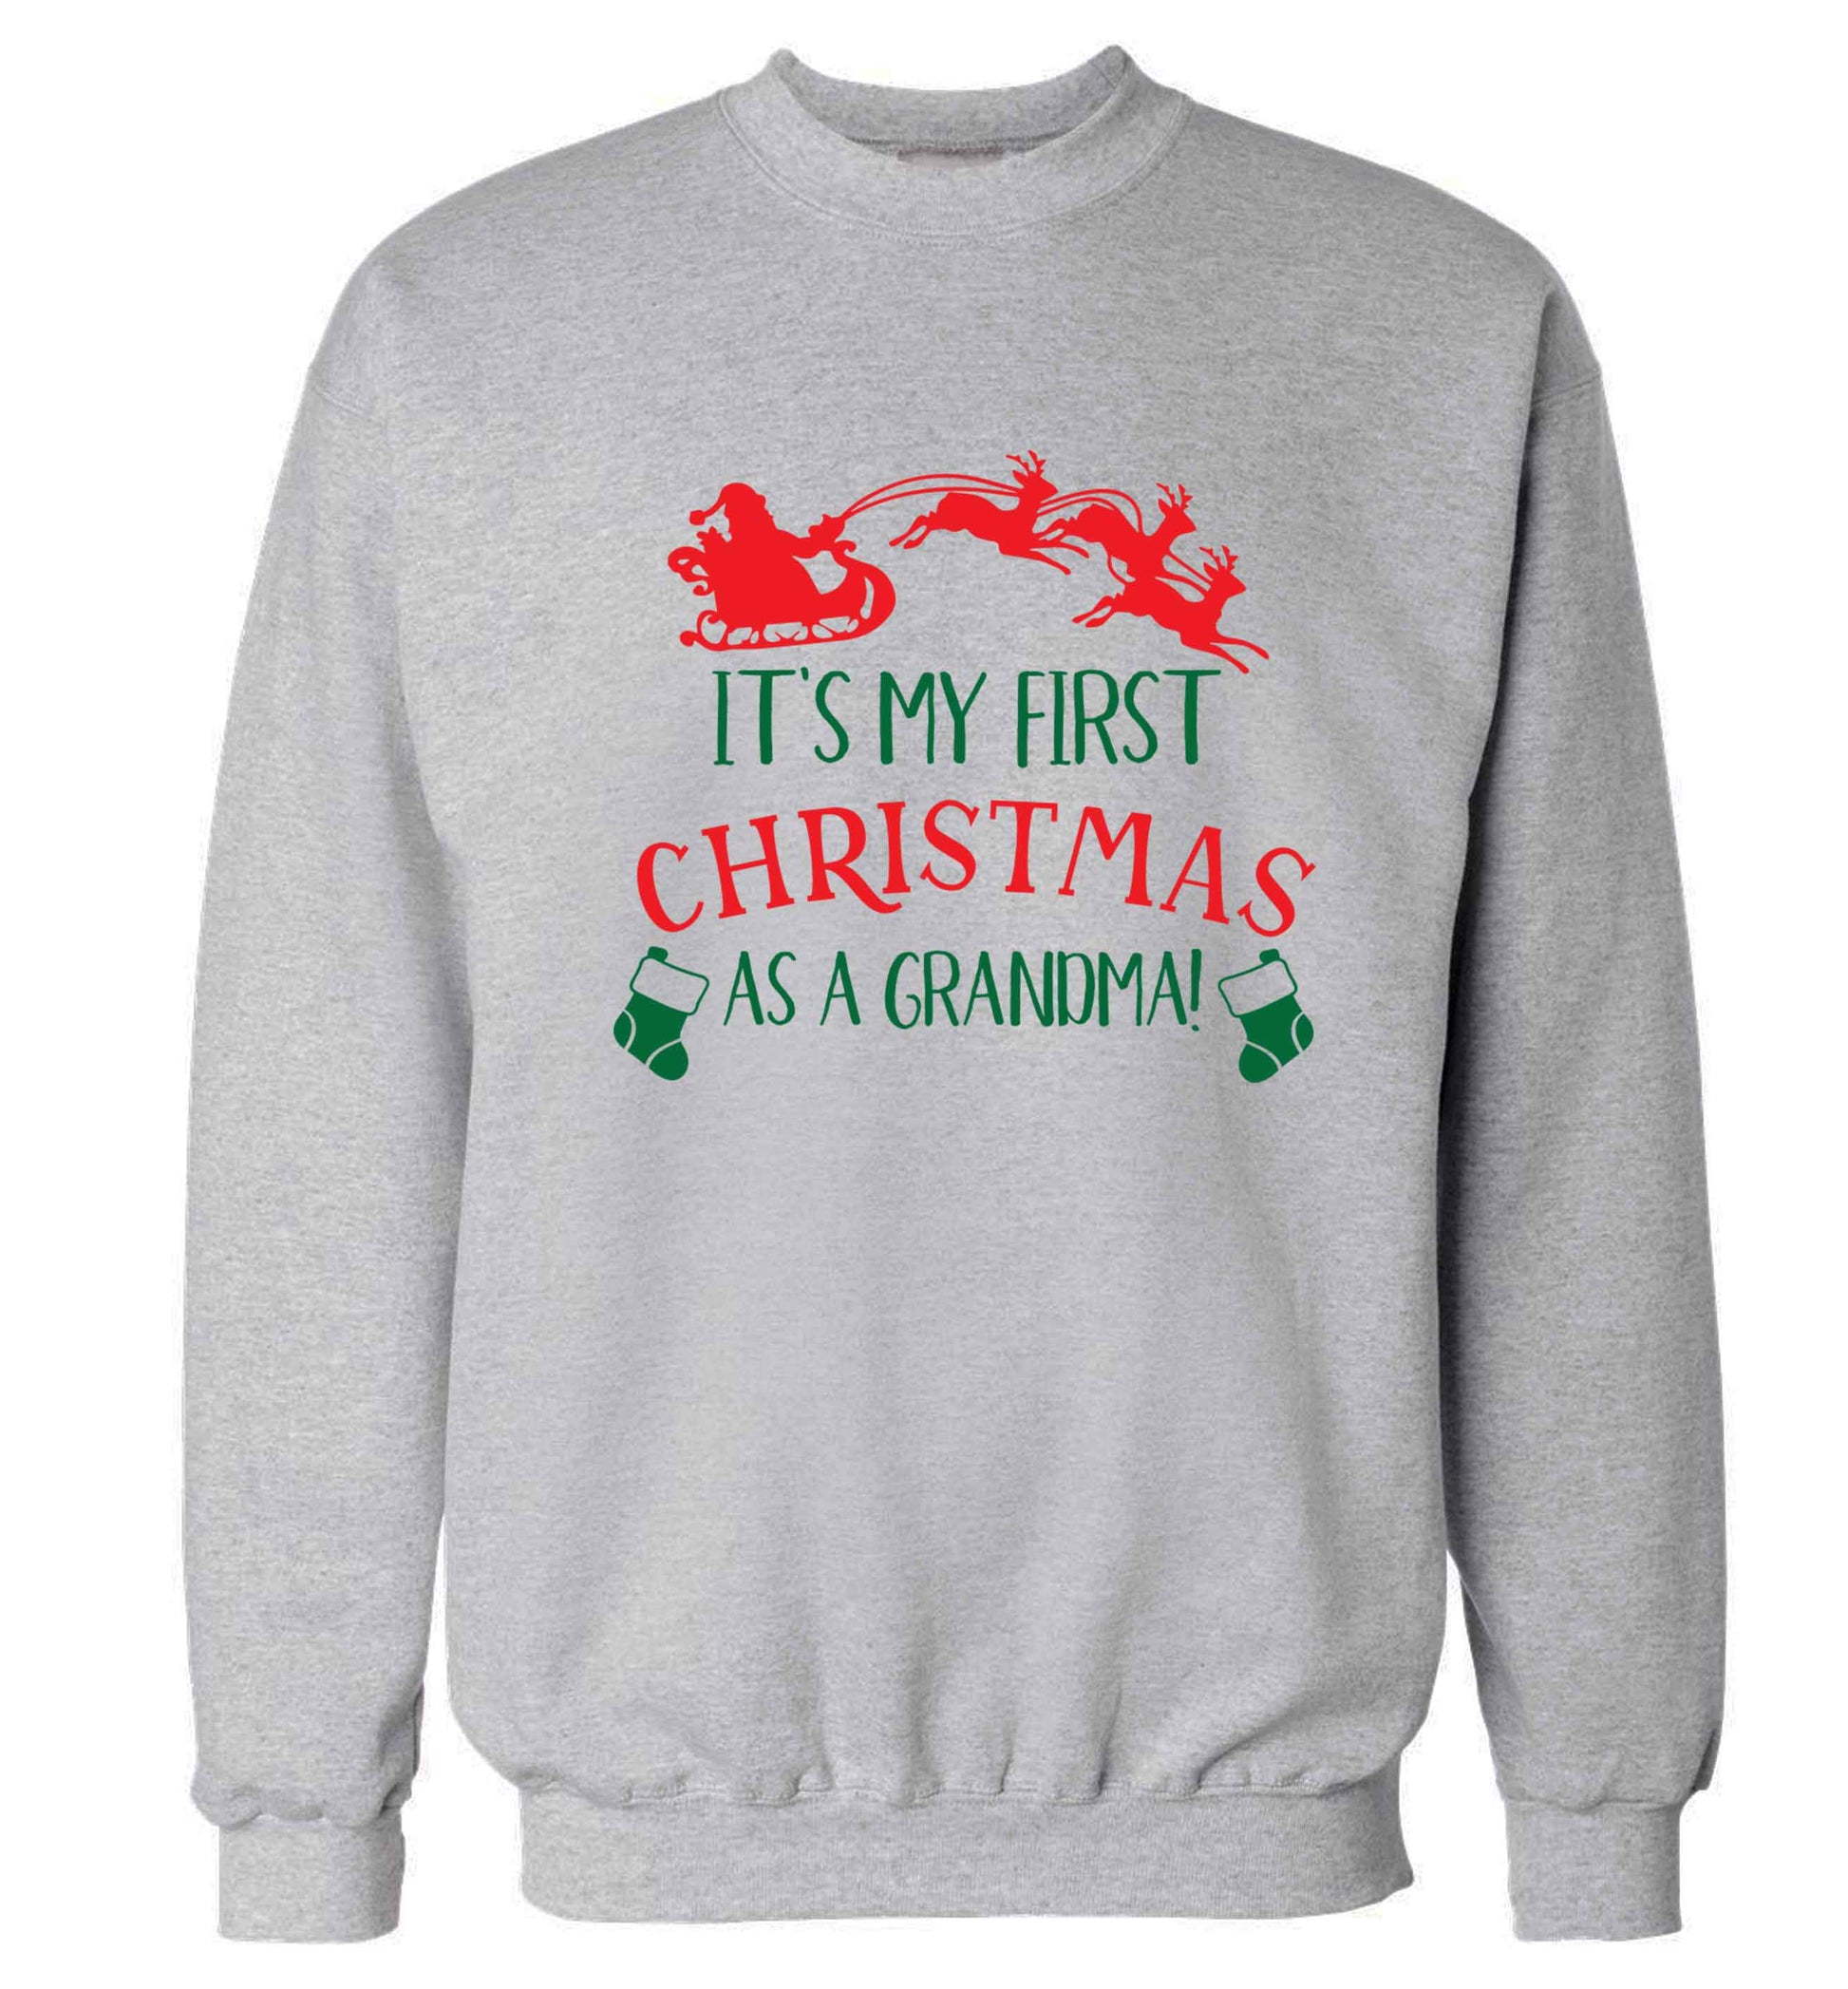 It's my first Christmas as a grandma! Adult's unisex grey Sweater 2XL